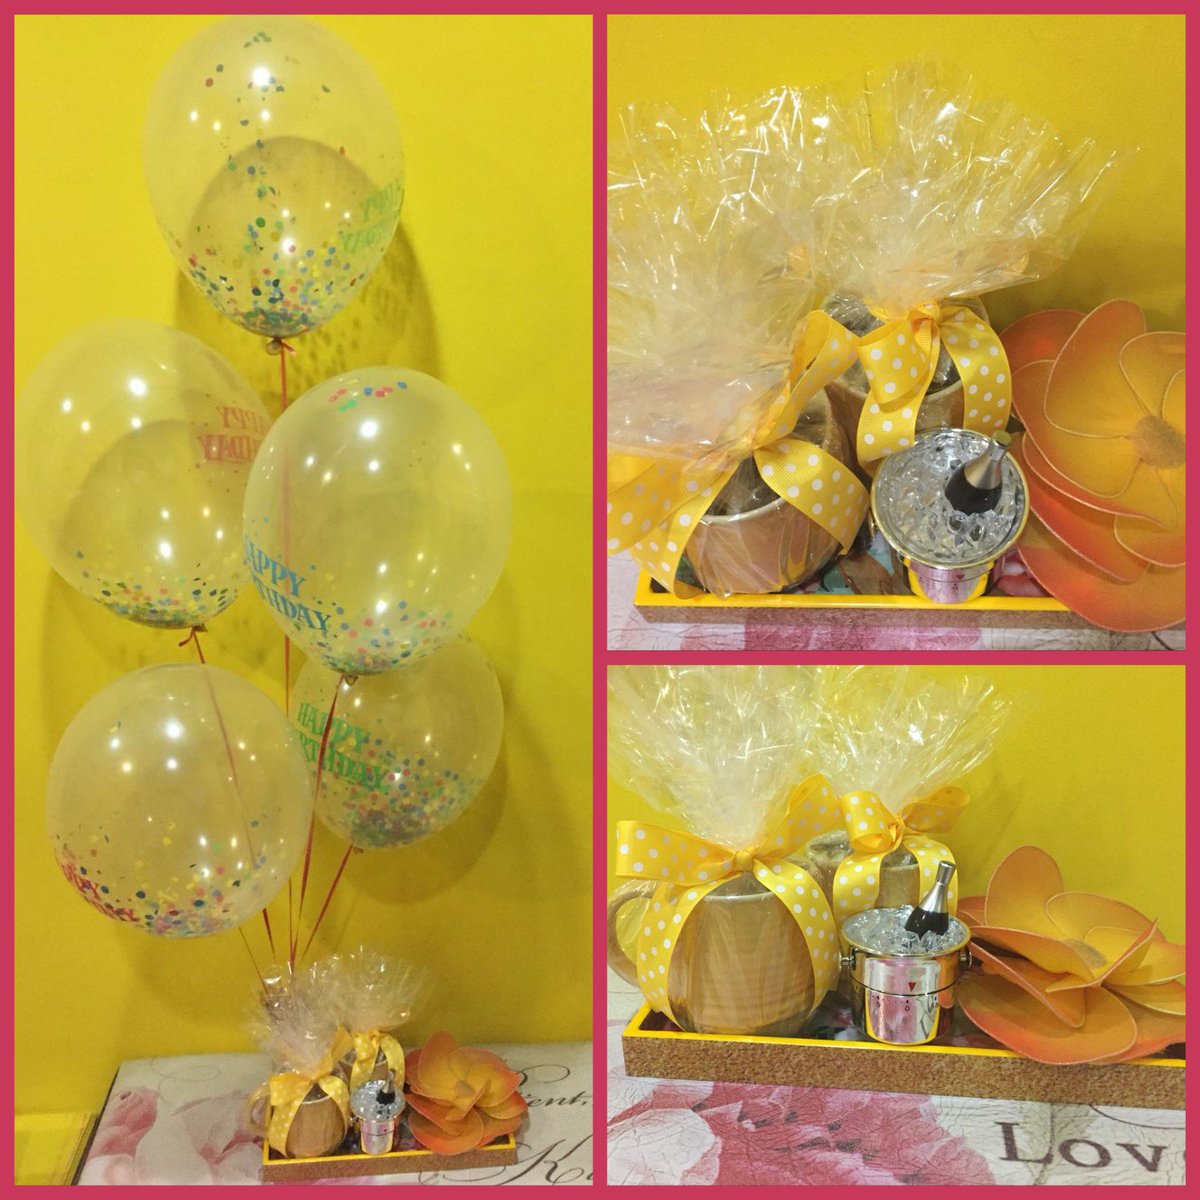 Birthday hampers wishing your special ones Bright and Cheerful years ahead . 
#birthdayhampers #birthdaygifts #brightandsunny #cheerful #gifting #Twinkles #hbd #partyshop #chennai